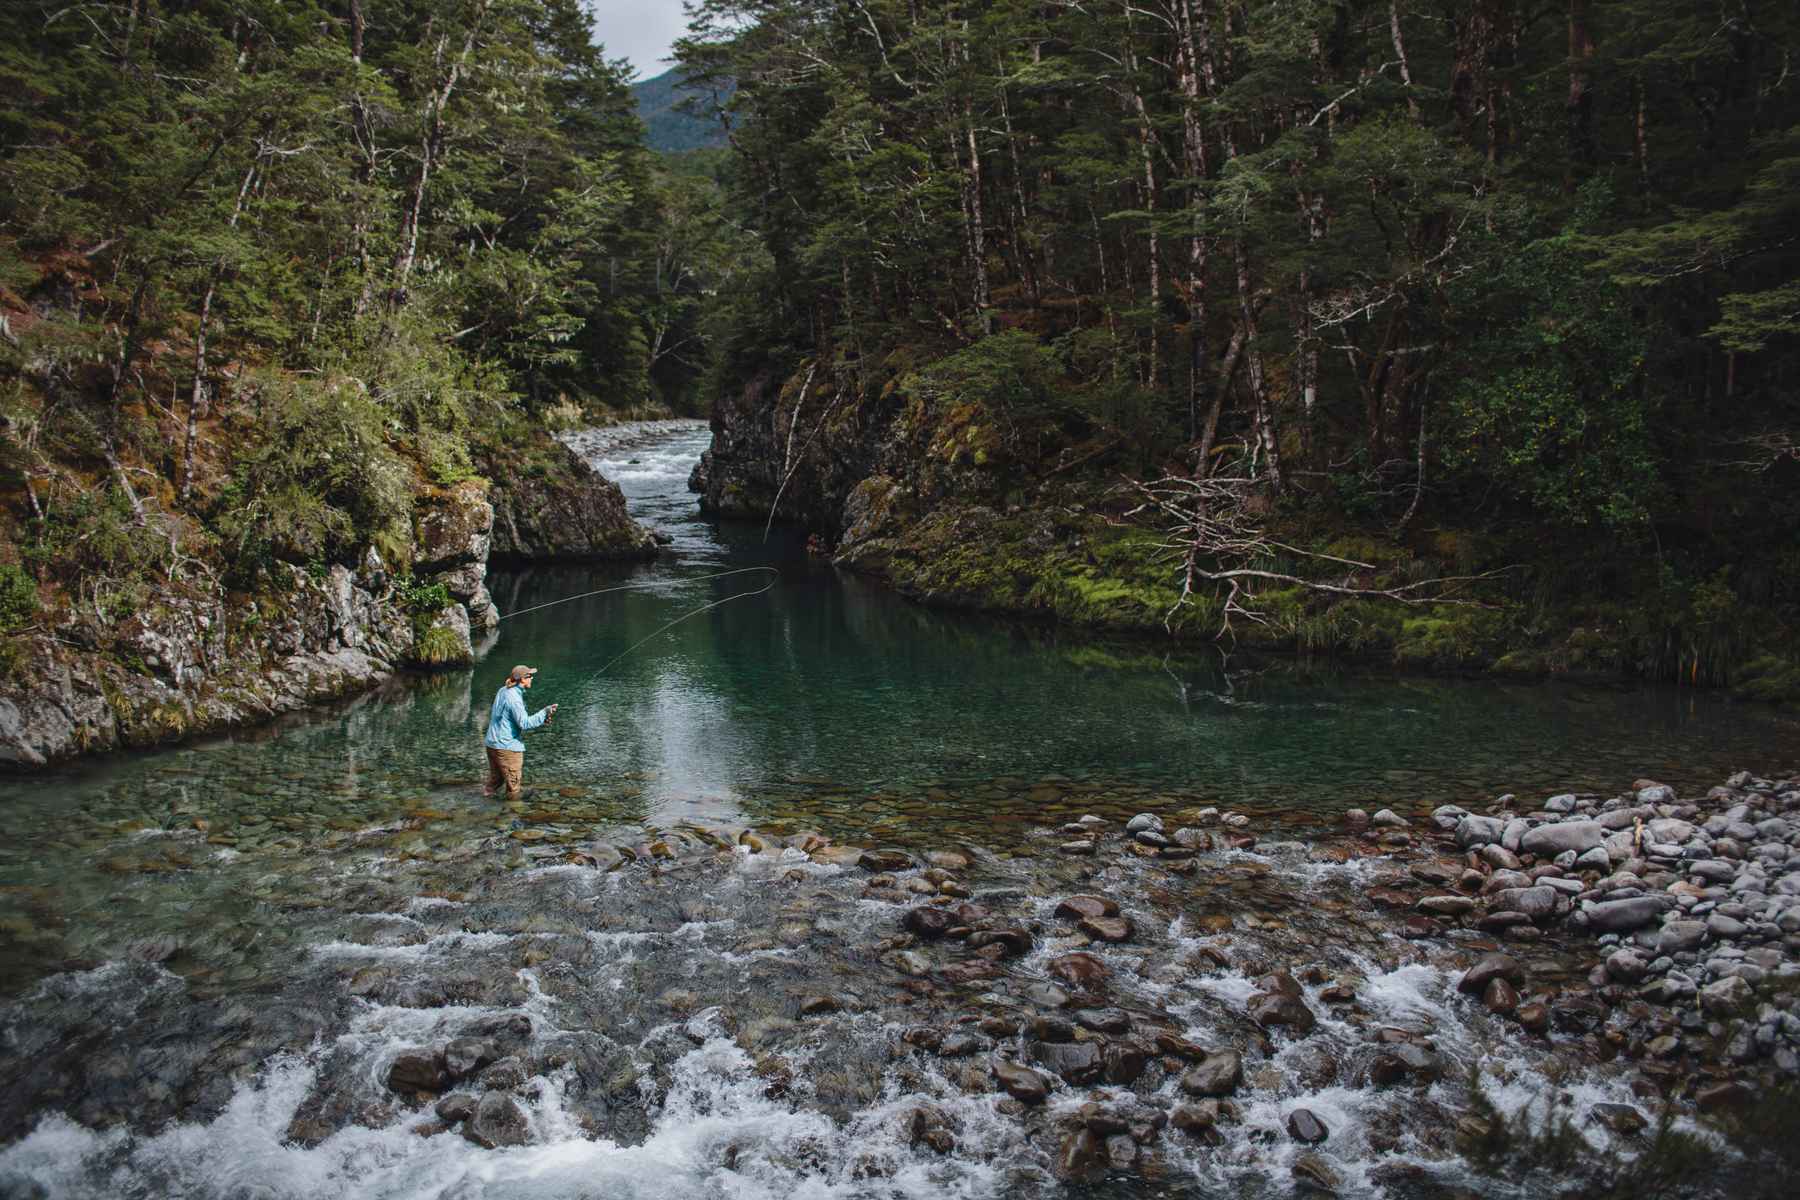 http://www.hatchmag.com/sites/default/files/styles/extra-large/public/field/image/New-Zealand-flyfishing-lifestyle-photography-3.jpg